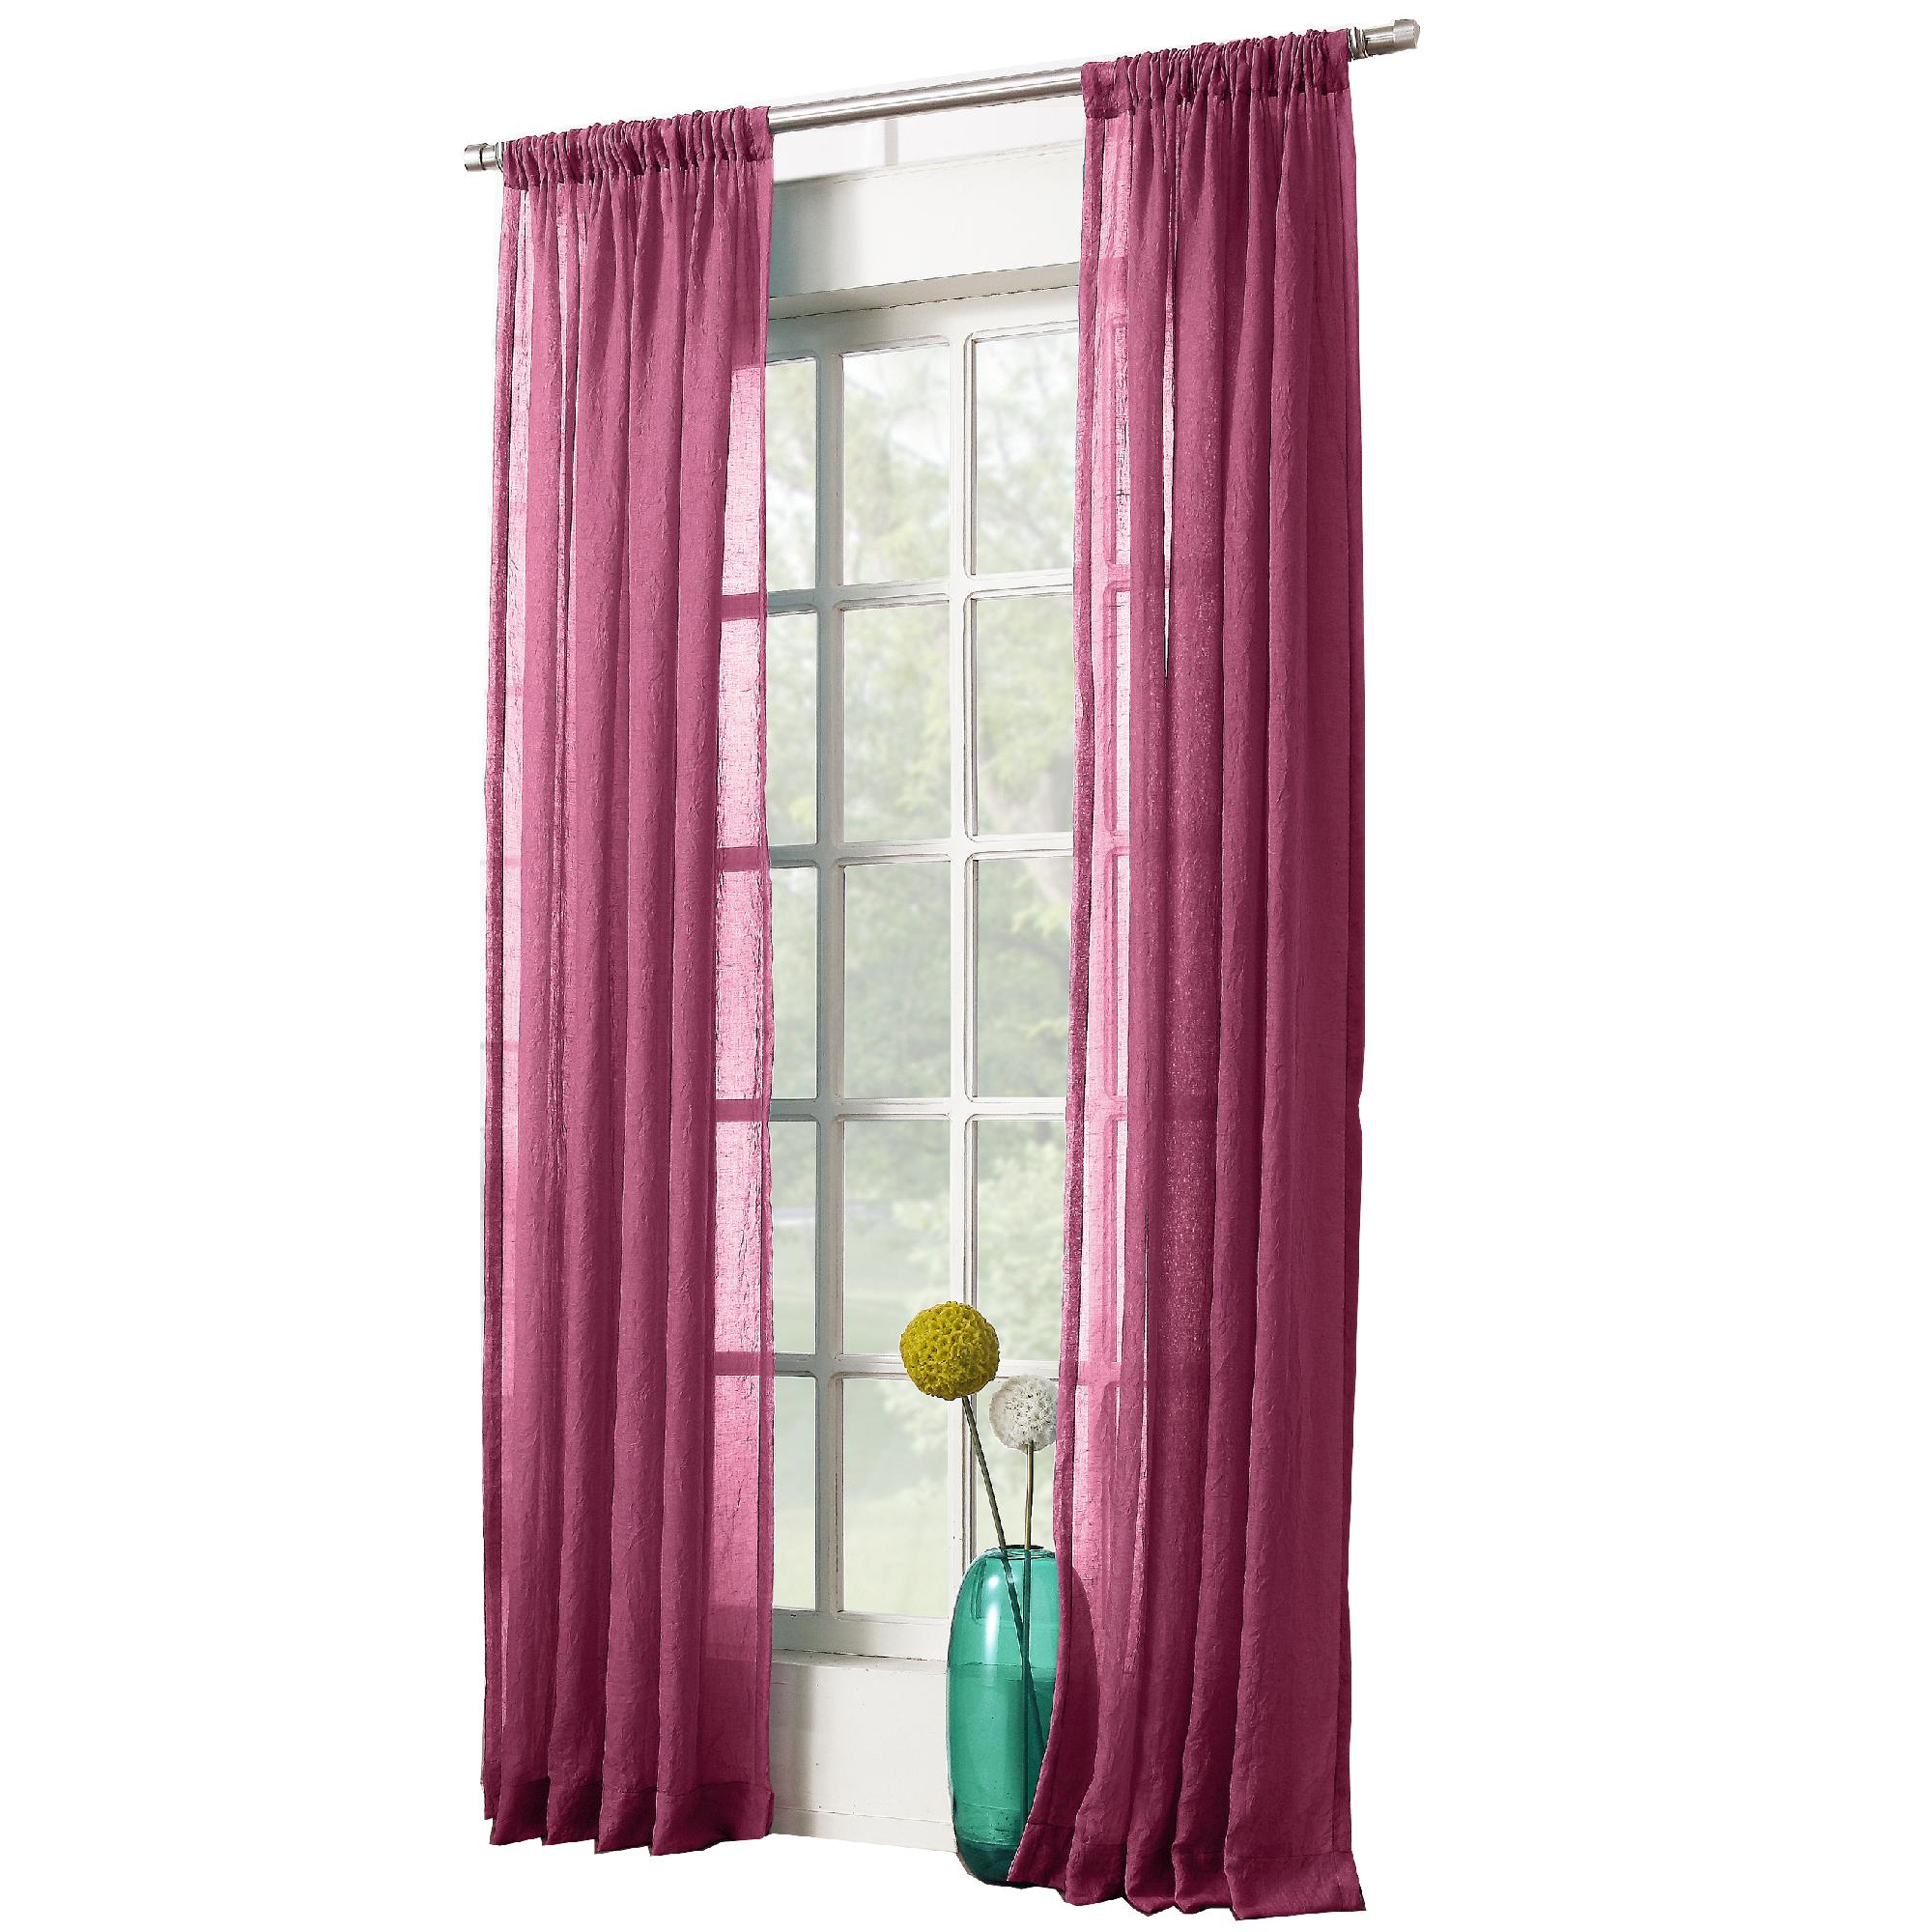 Laos Relaxed Crushed Sheer Curtain 50x95